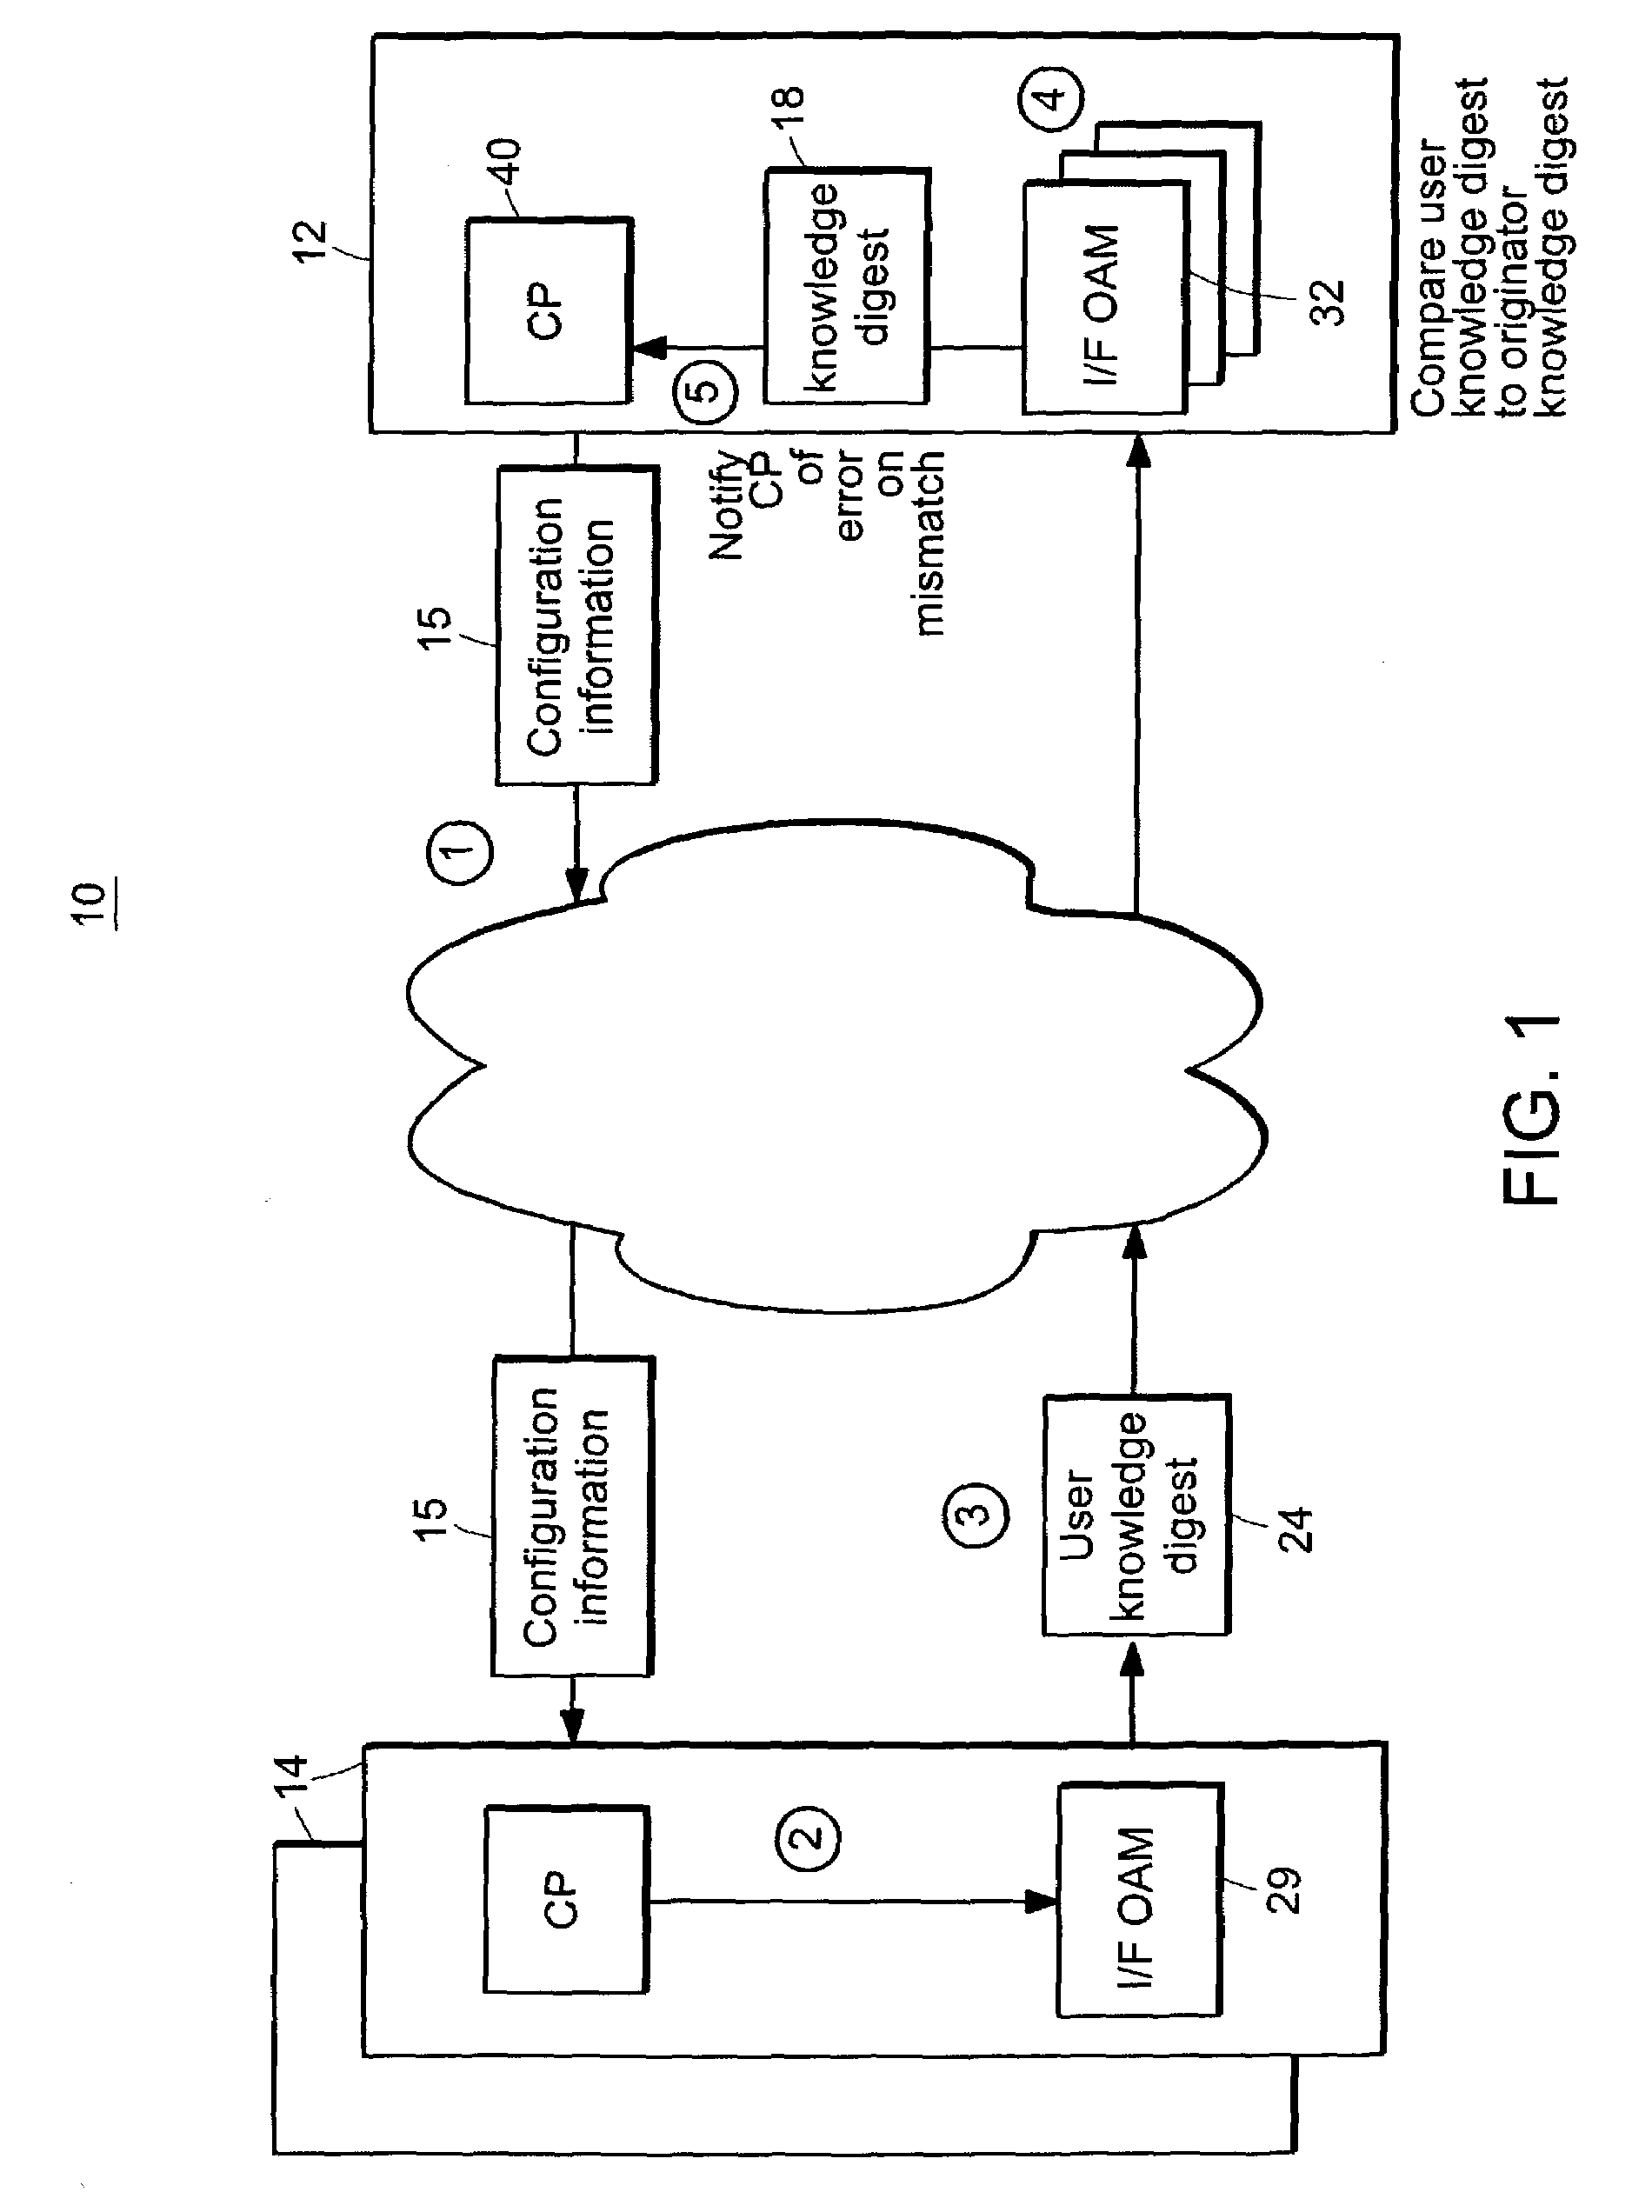 Method for using a verification probe in an LDP MPLS network